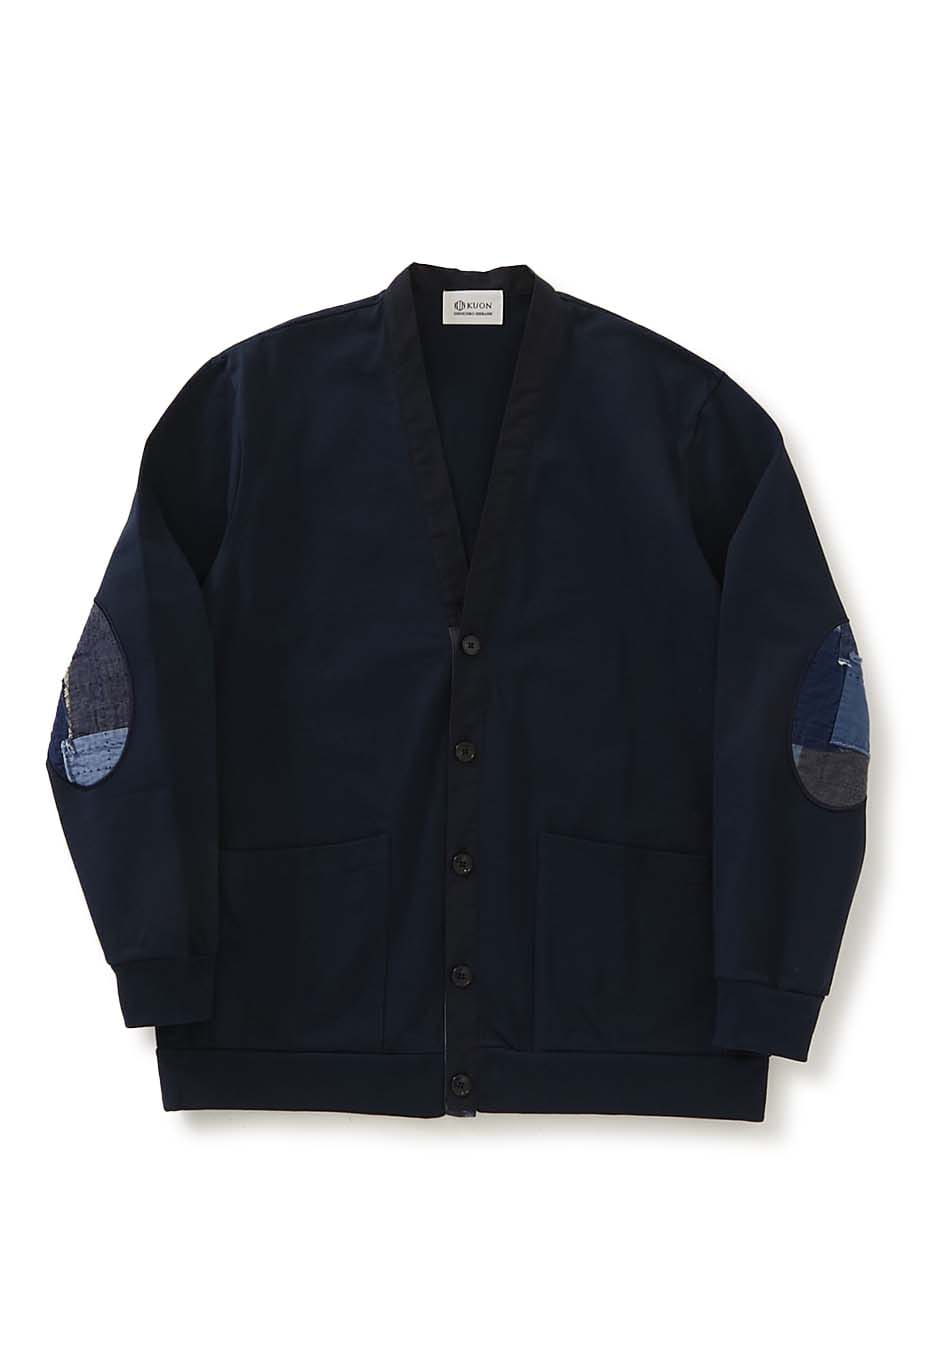 KUON Boro patched jersey Cardigans